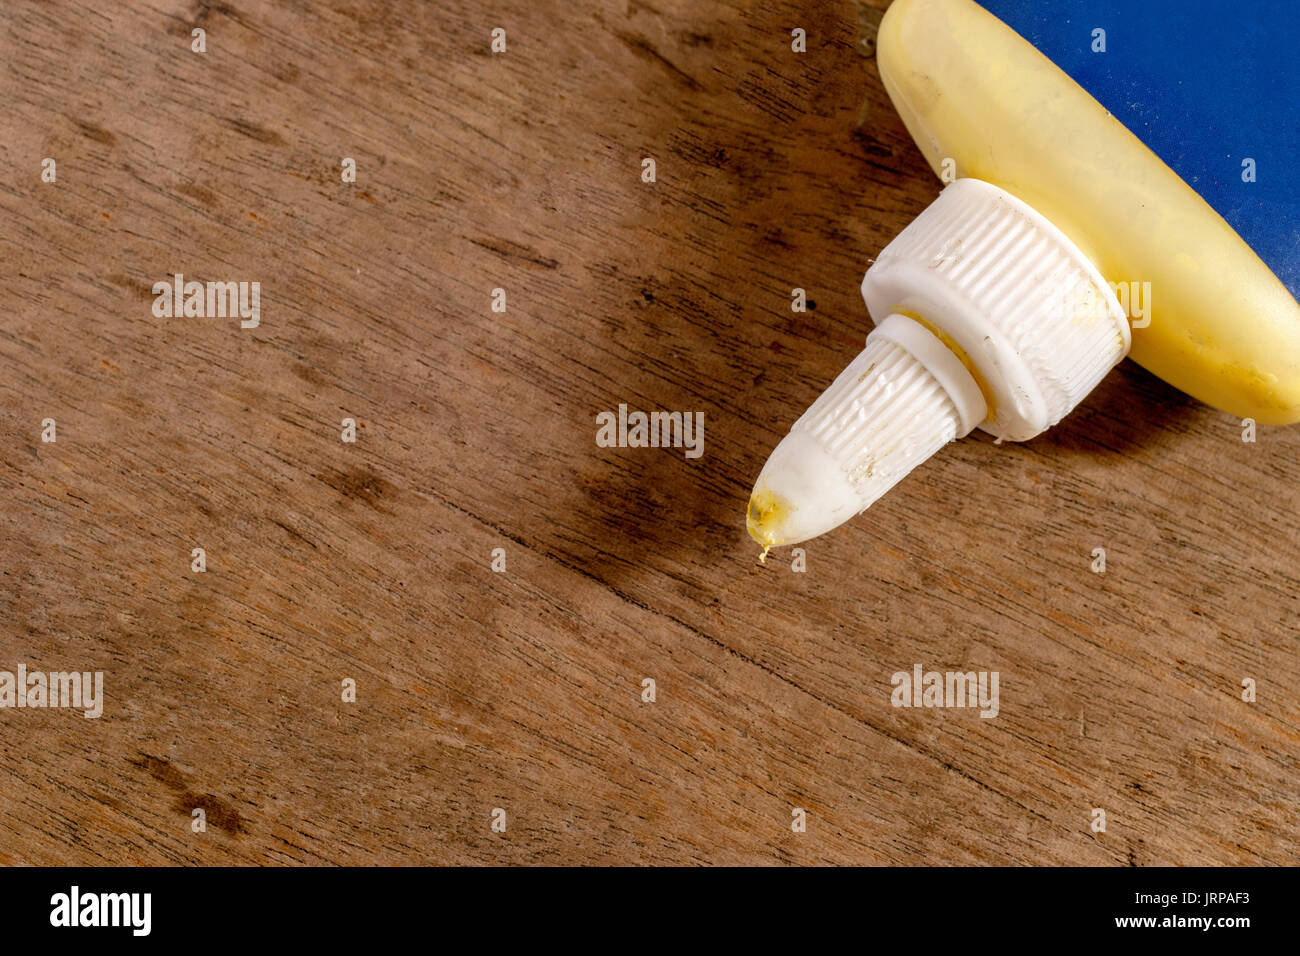 Wood glue with blank blue label on a wooden surface Stock Photo